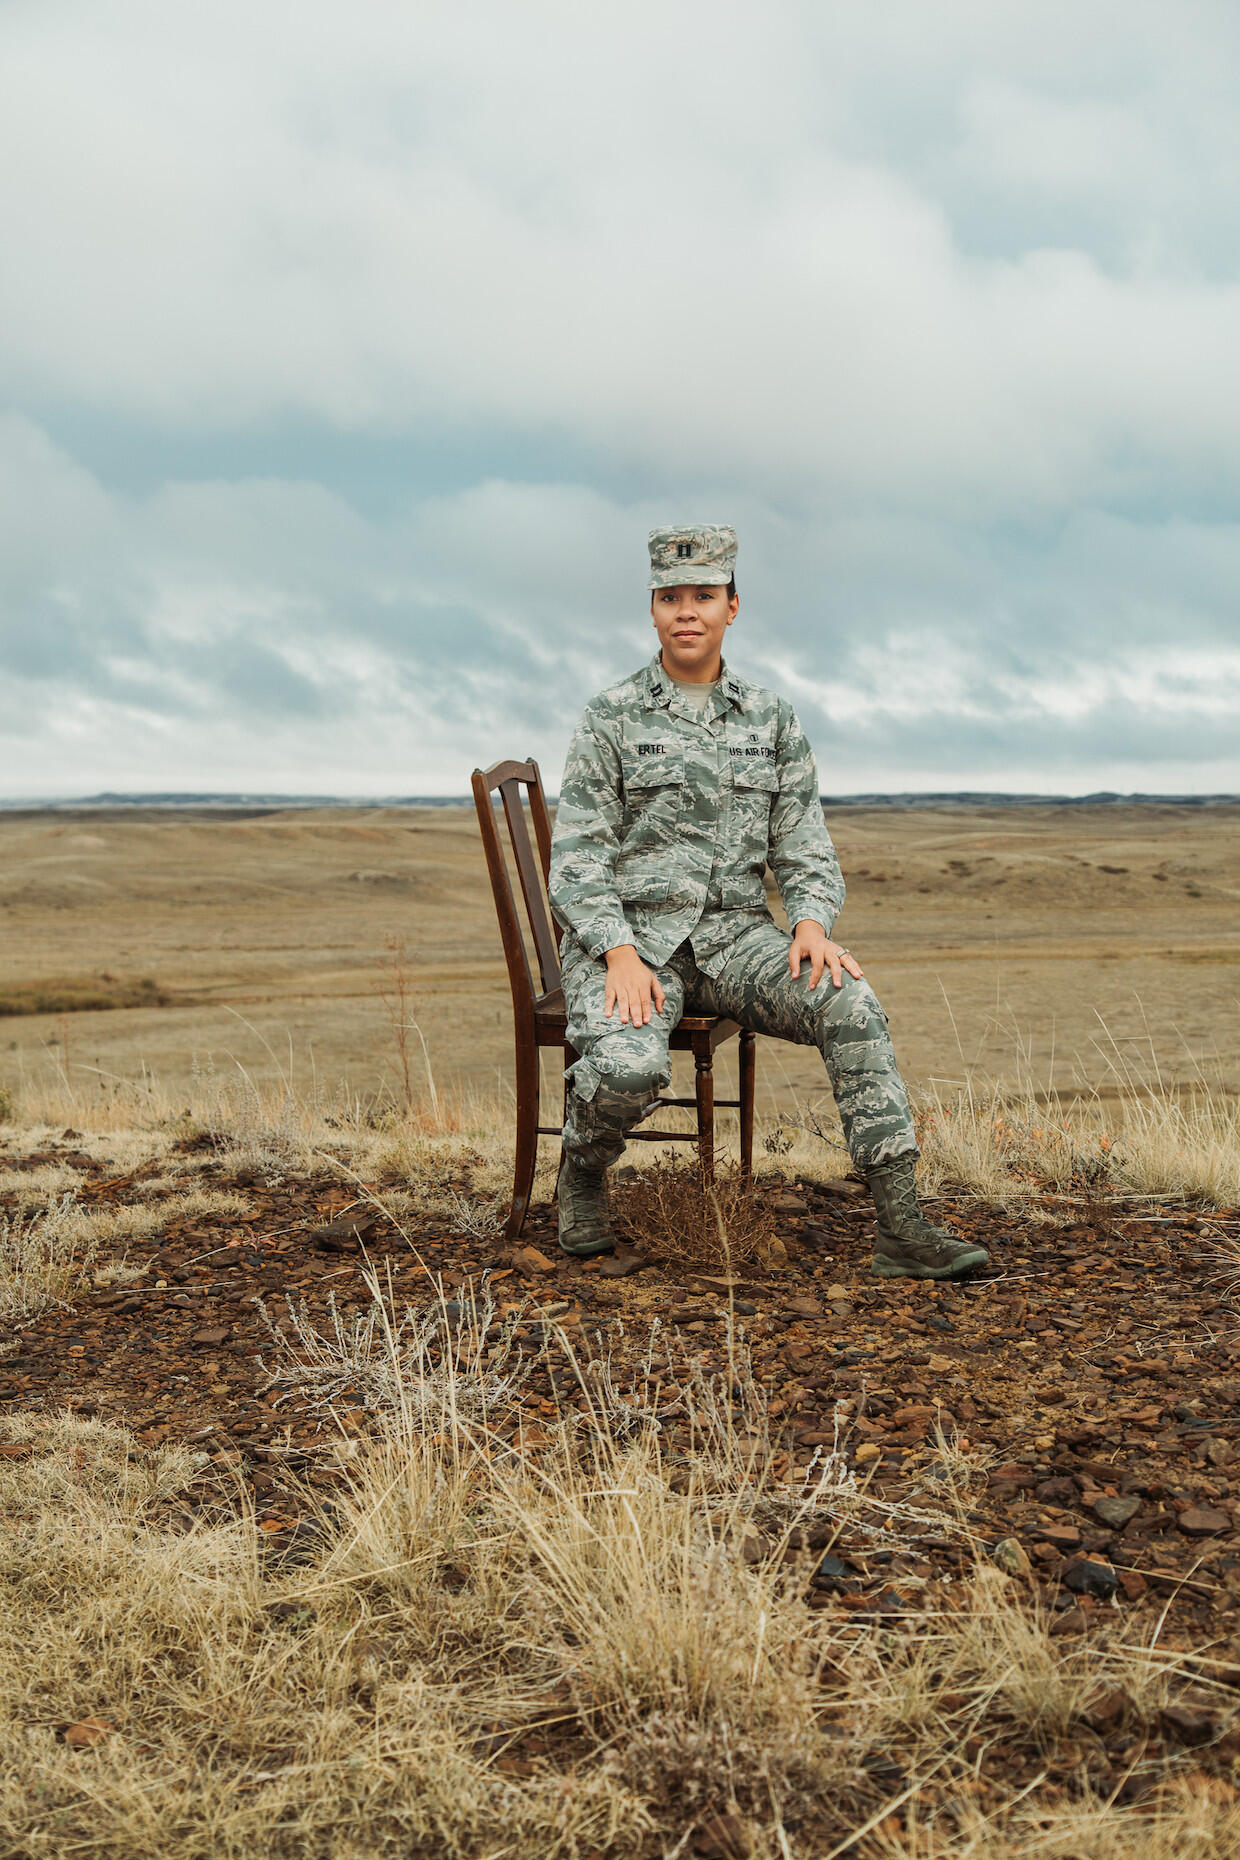 Woman in Army camo uniform seated in a field.